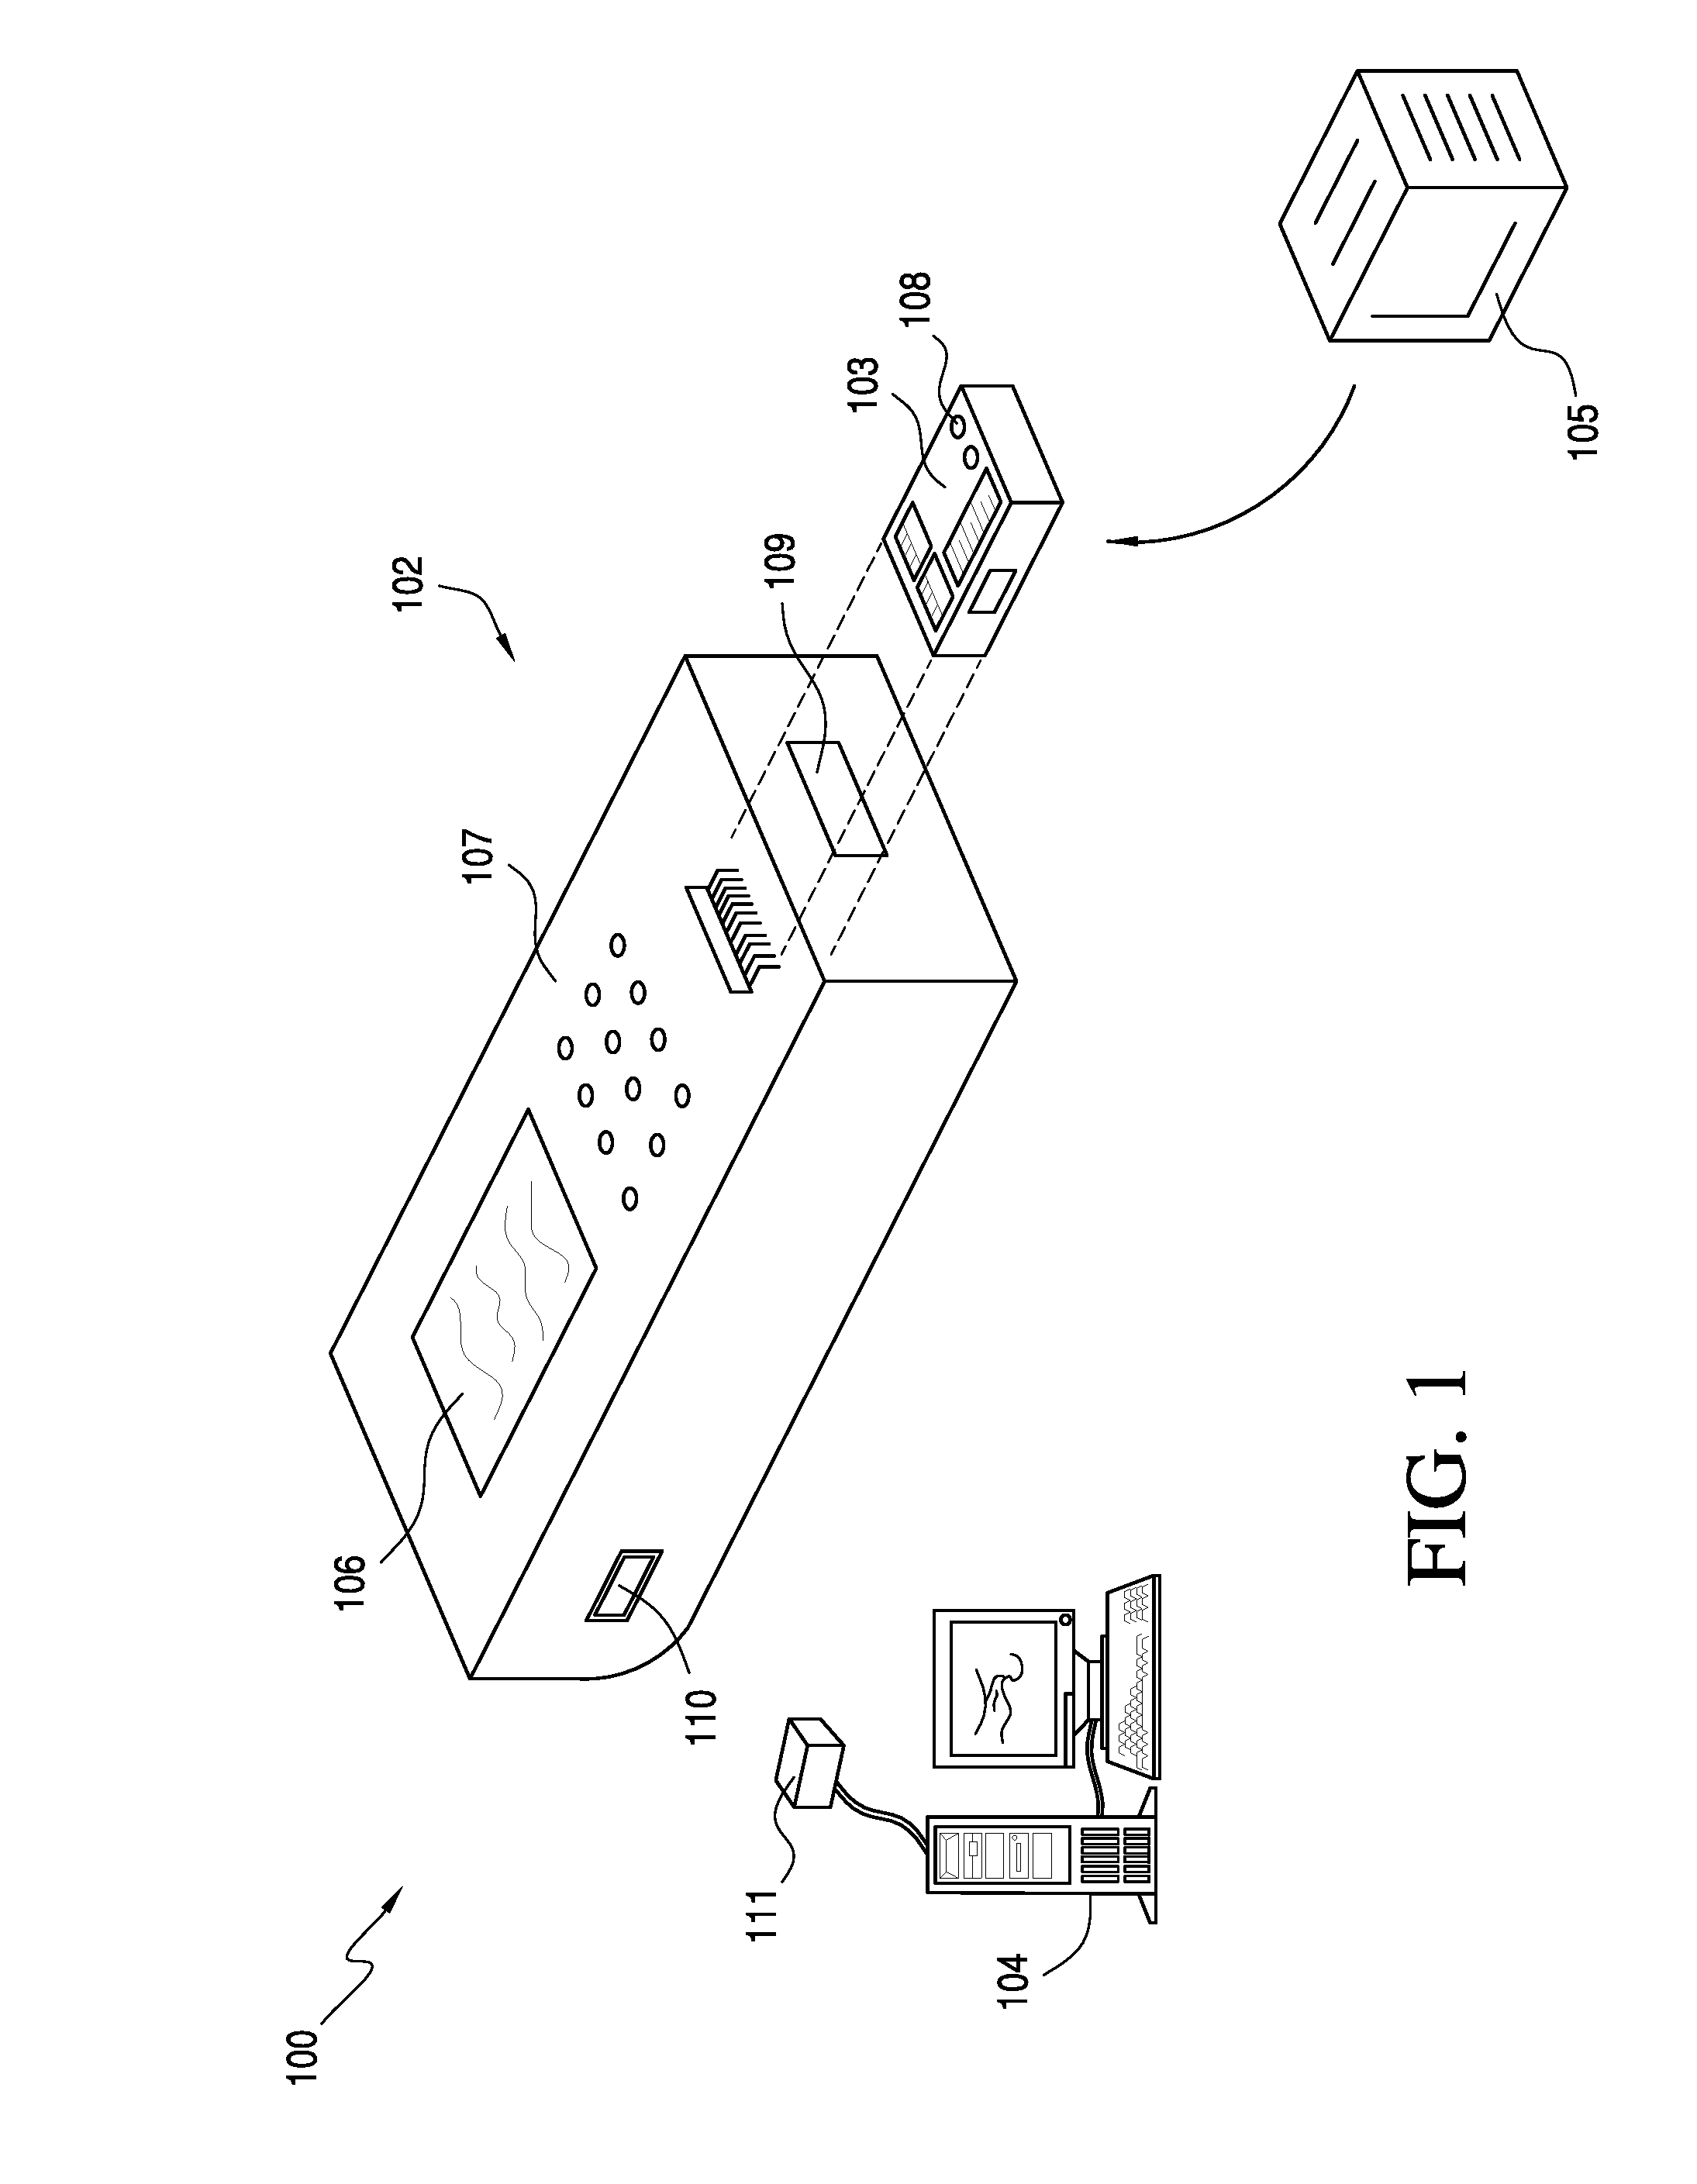 Systems and methods for assuring quality compliance of point-of-care instruments used with single-use testing devices